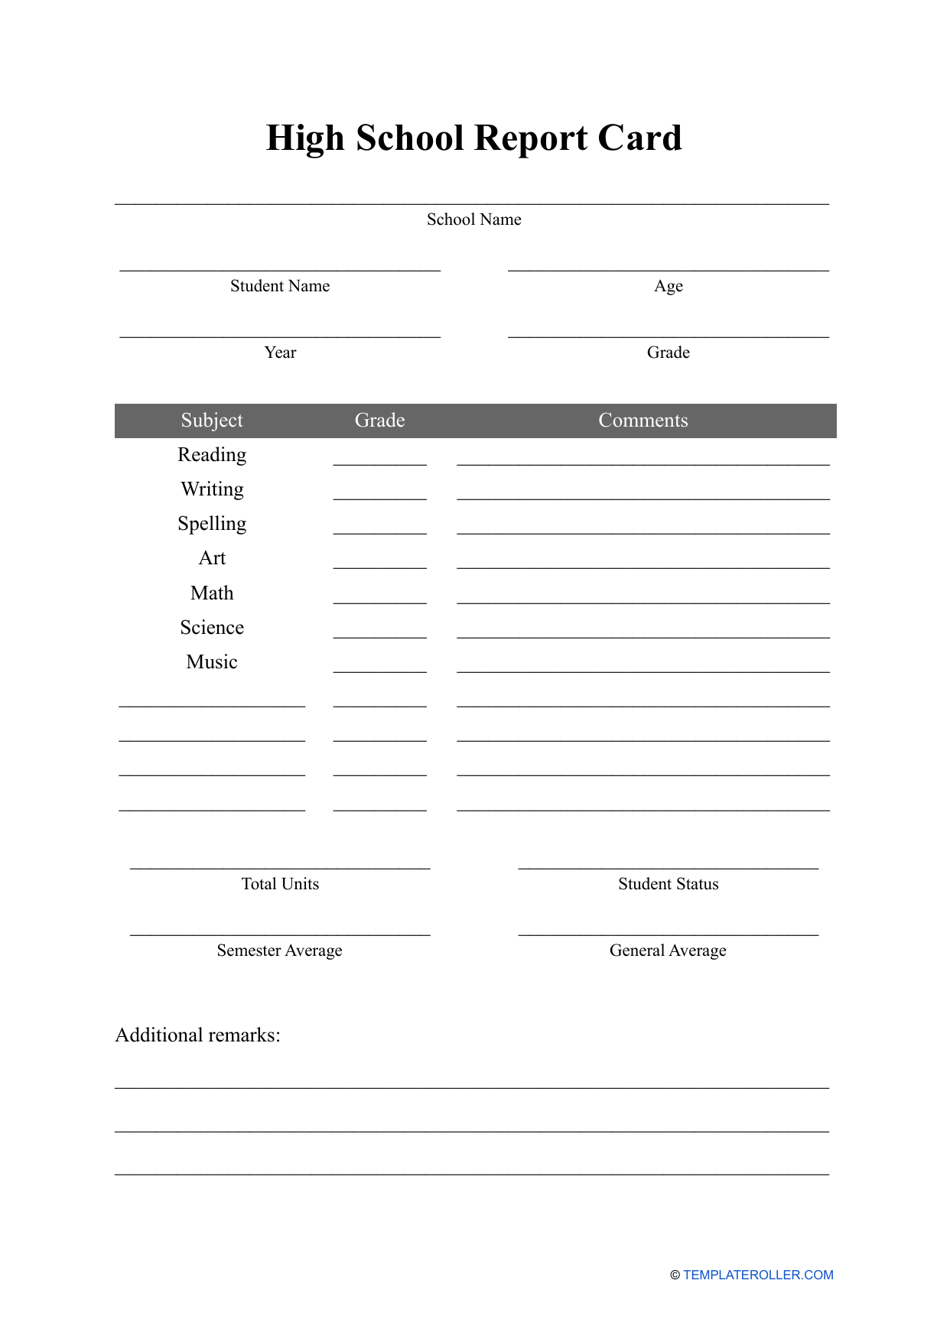 High School Report Card Template, Page 1